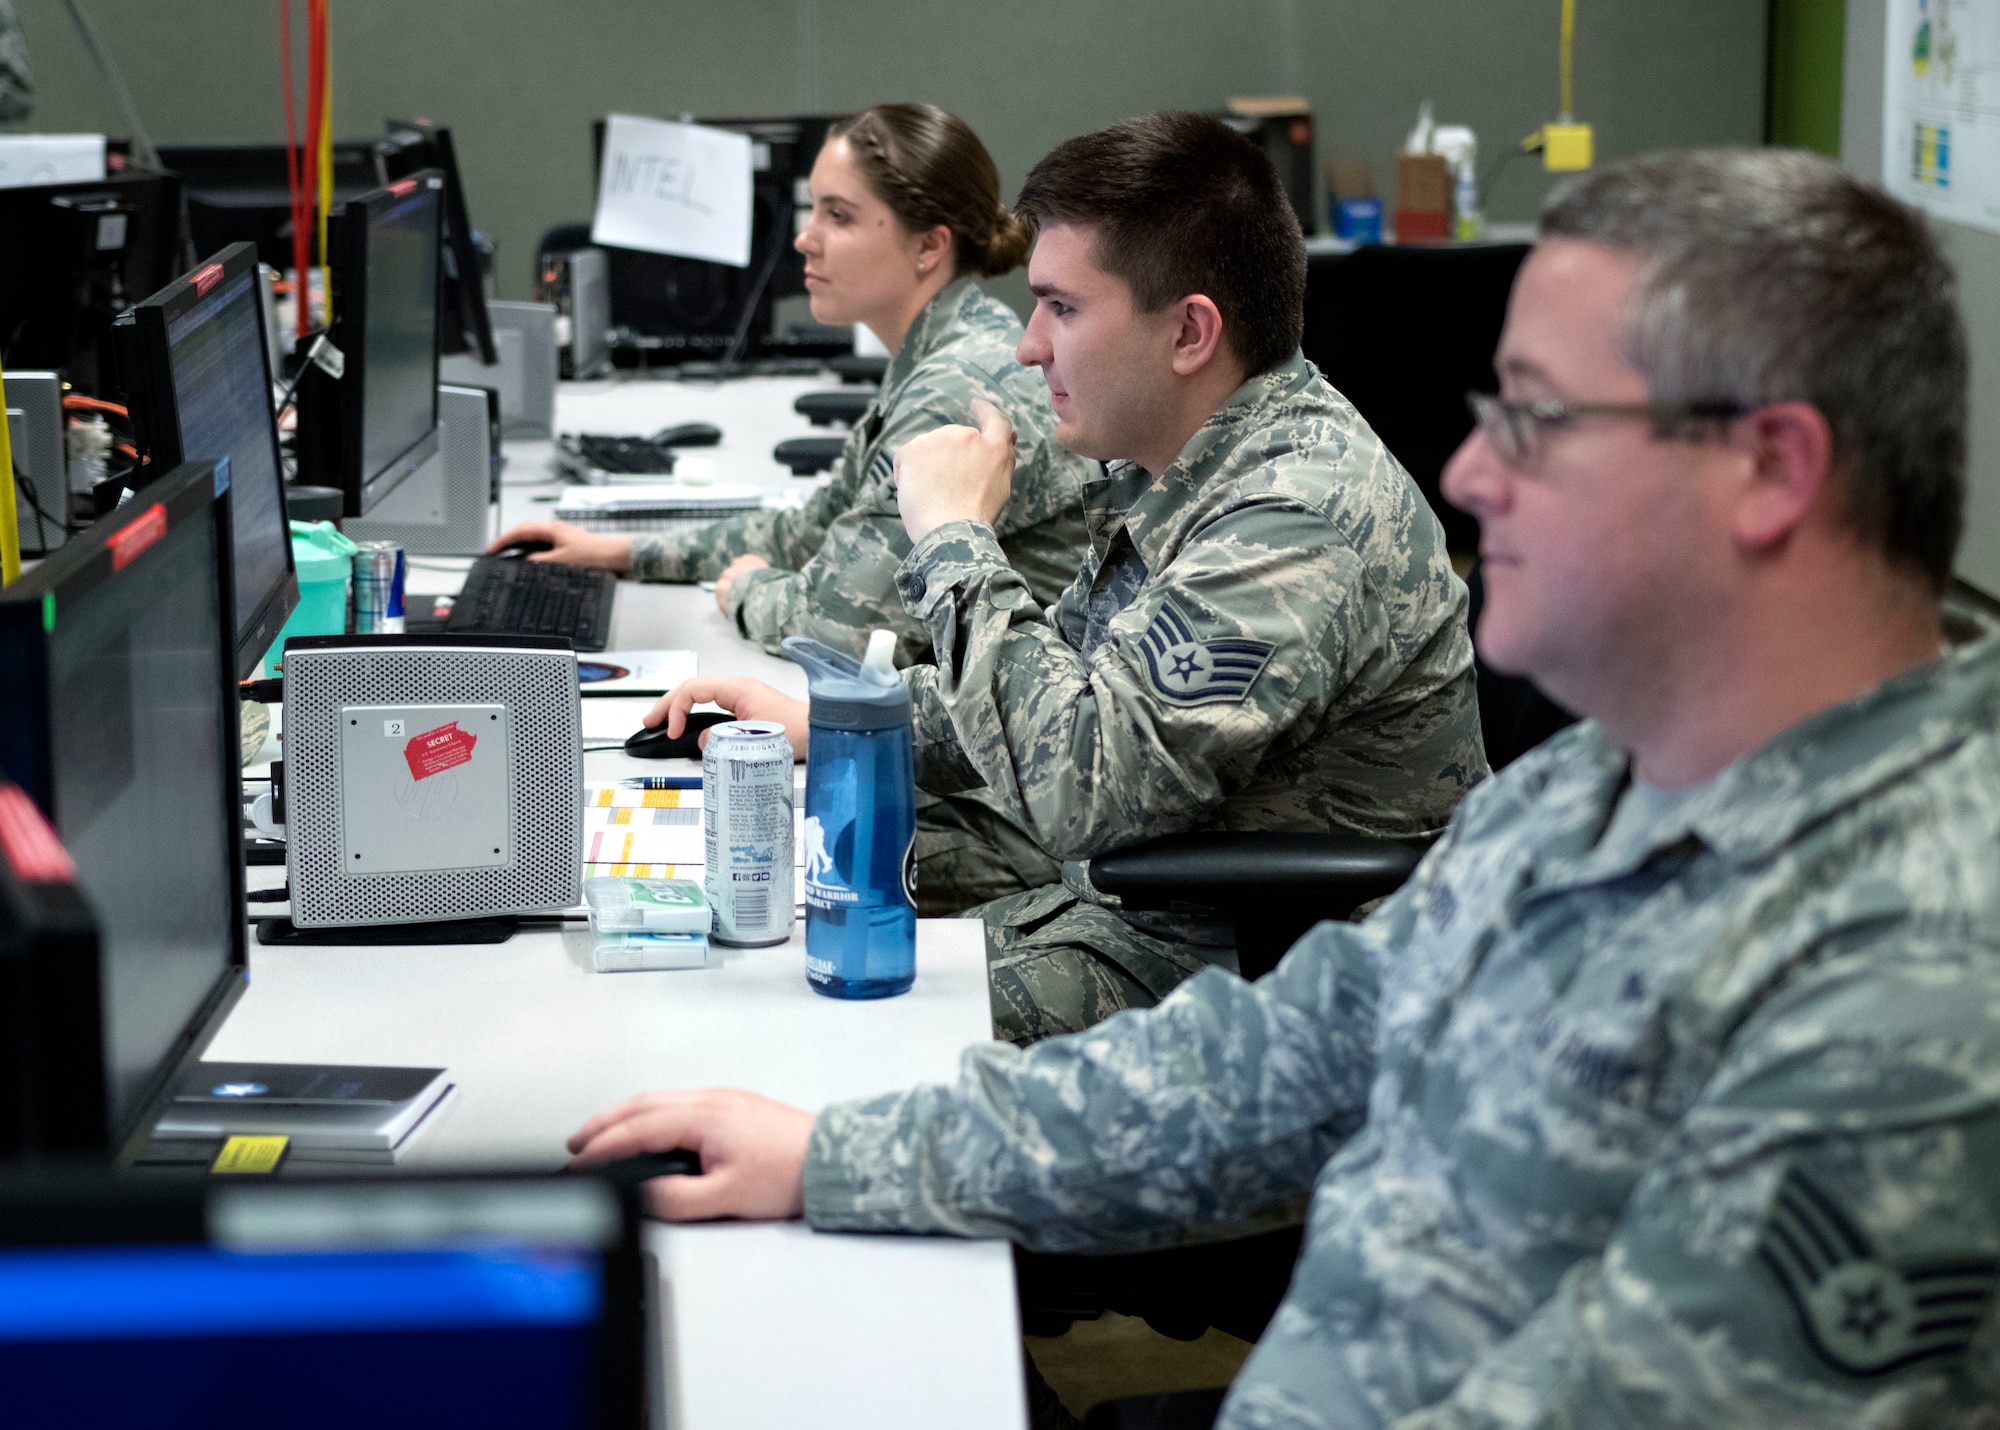 Air Force cyber operators participate in Exercise Black Demon 19-2 at Fort Sam Houston, Texas, May 9, 2019. The two-week-long exercise provided cyber mission forces and cybersecurity service partners an opportunity to demonstrate proficiency in defensive cyber tactics, techniques and procedures against an adversary. The exercise also marked the first time an installation-level mission defense team participated. (U.S. Army photo by Jesus Partida)